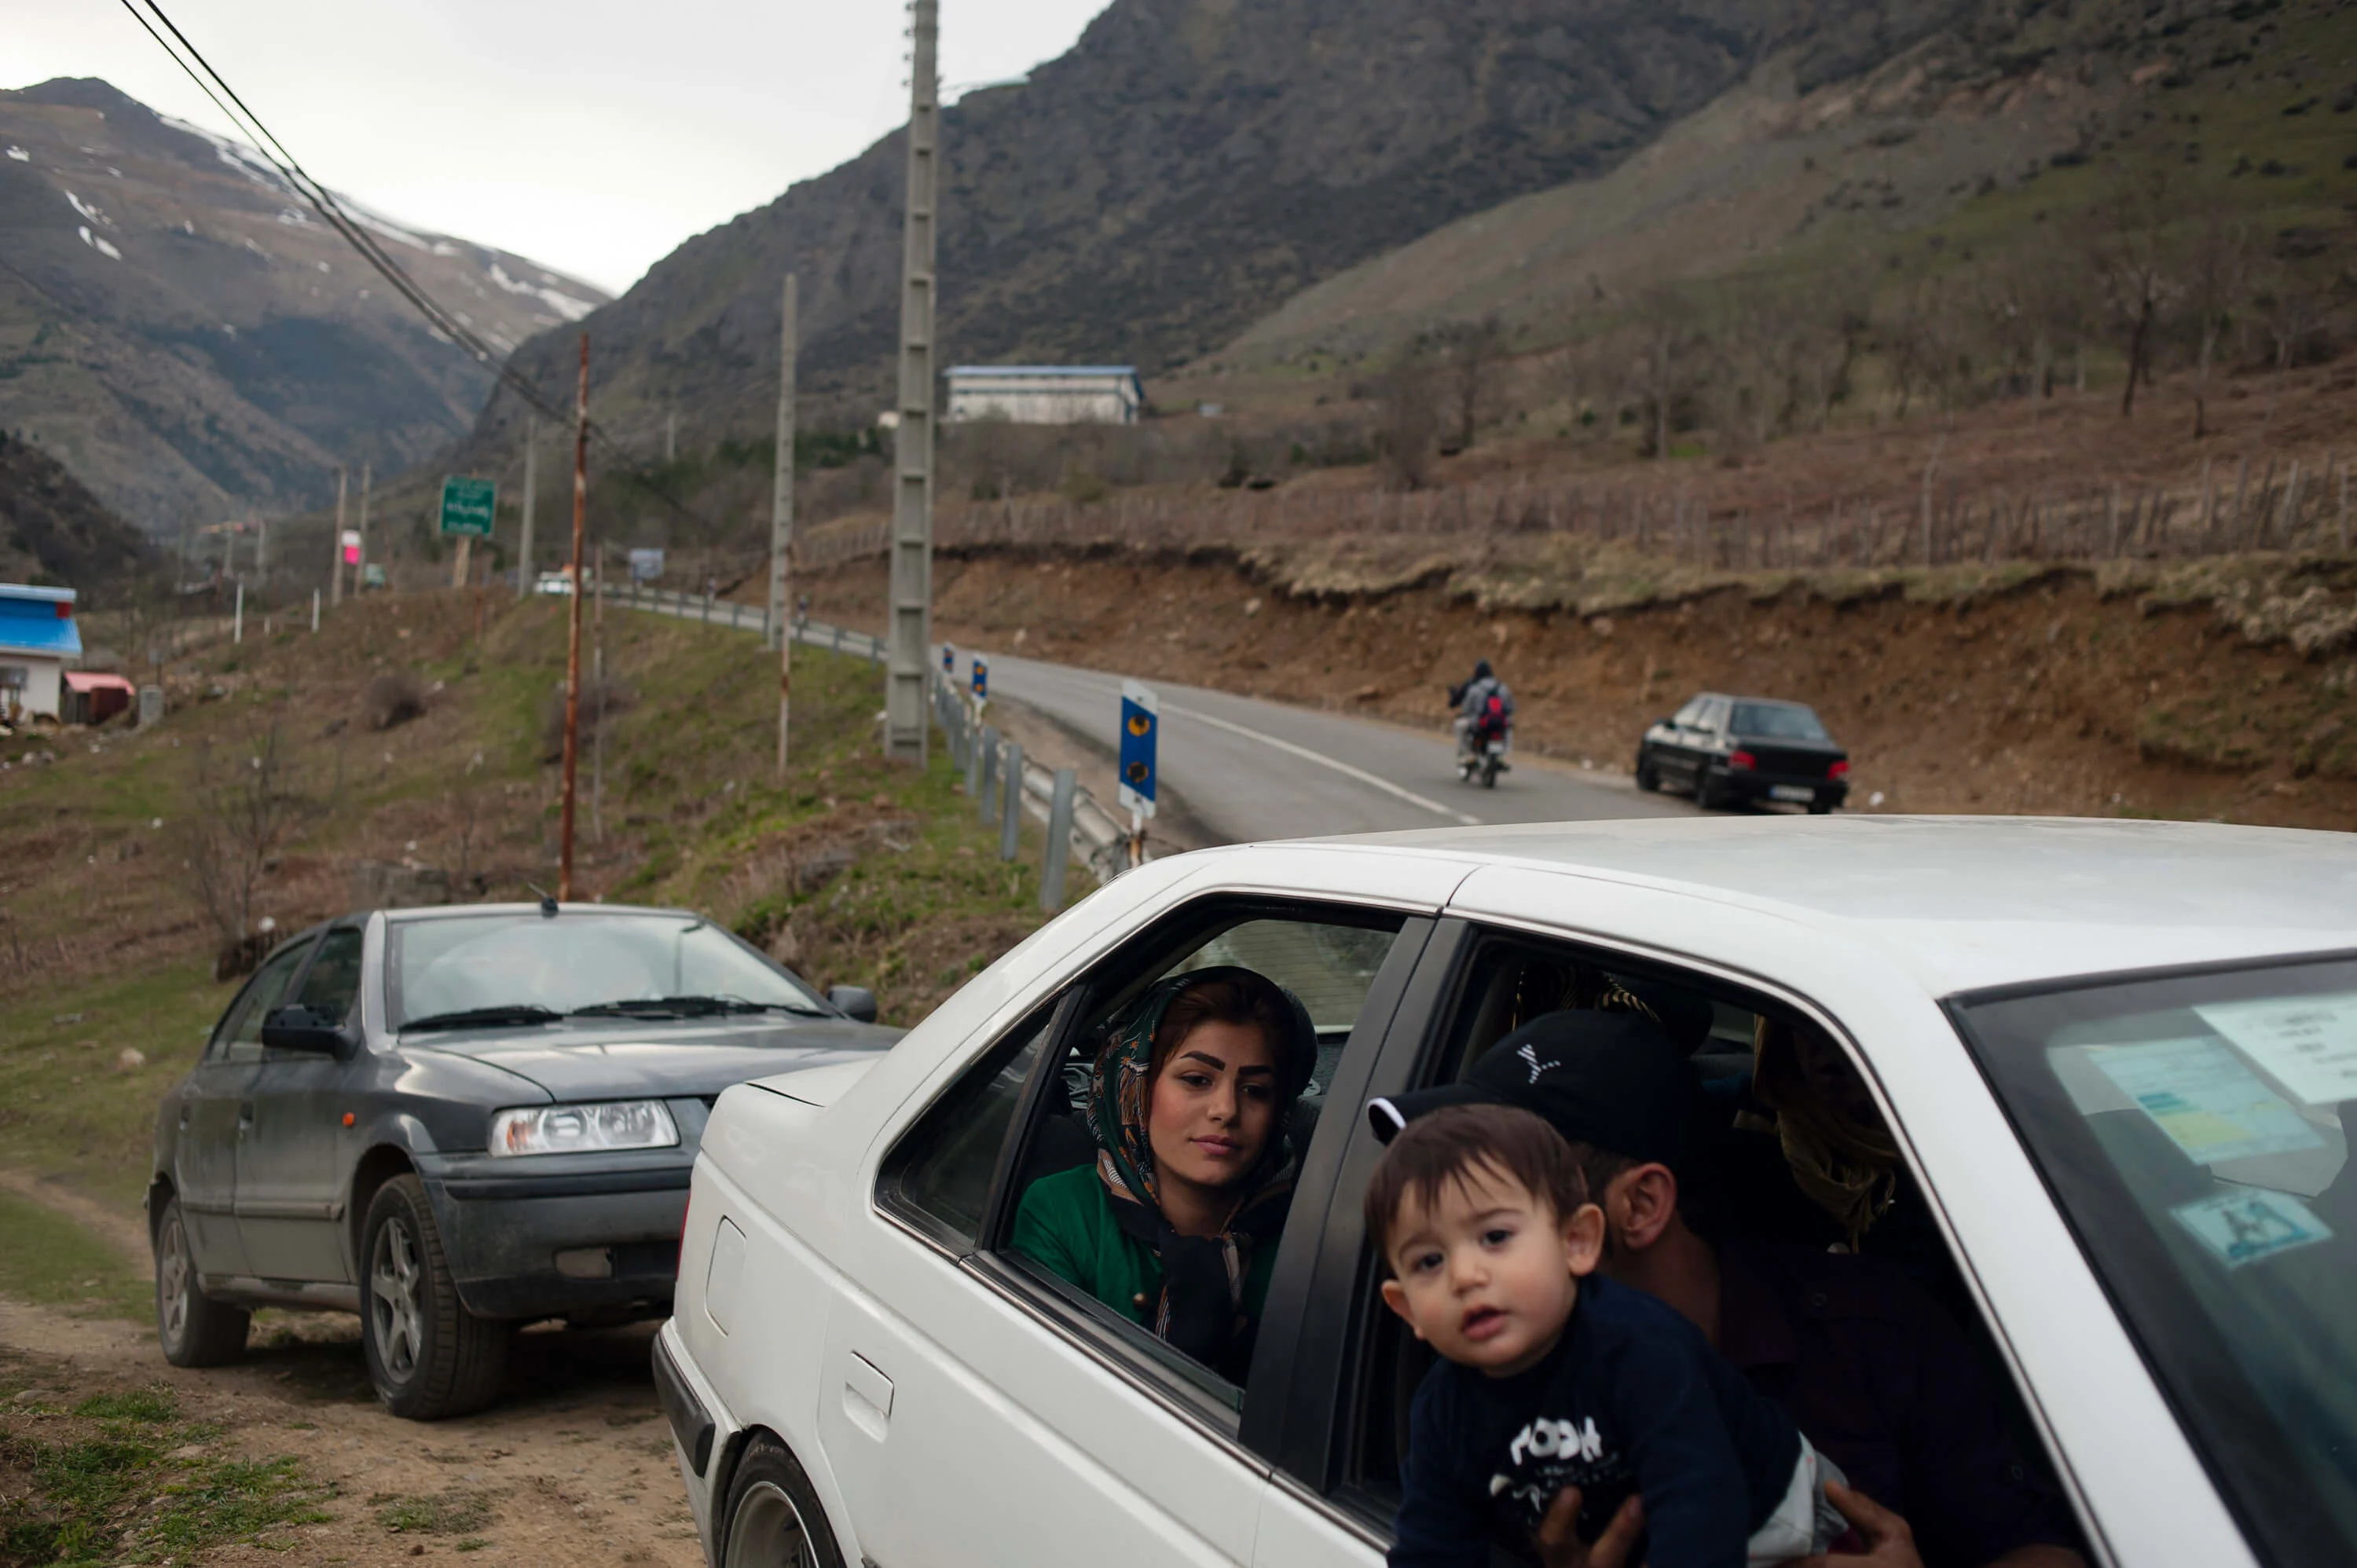 A family drive out of a open pit where tourists and families have made a stop to enjoy the scenery, during No Rooz holiday, which marks the beginning of Iranian New Year.